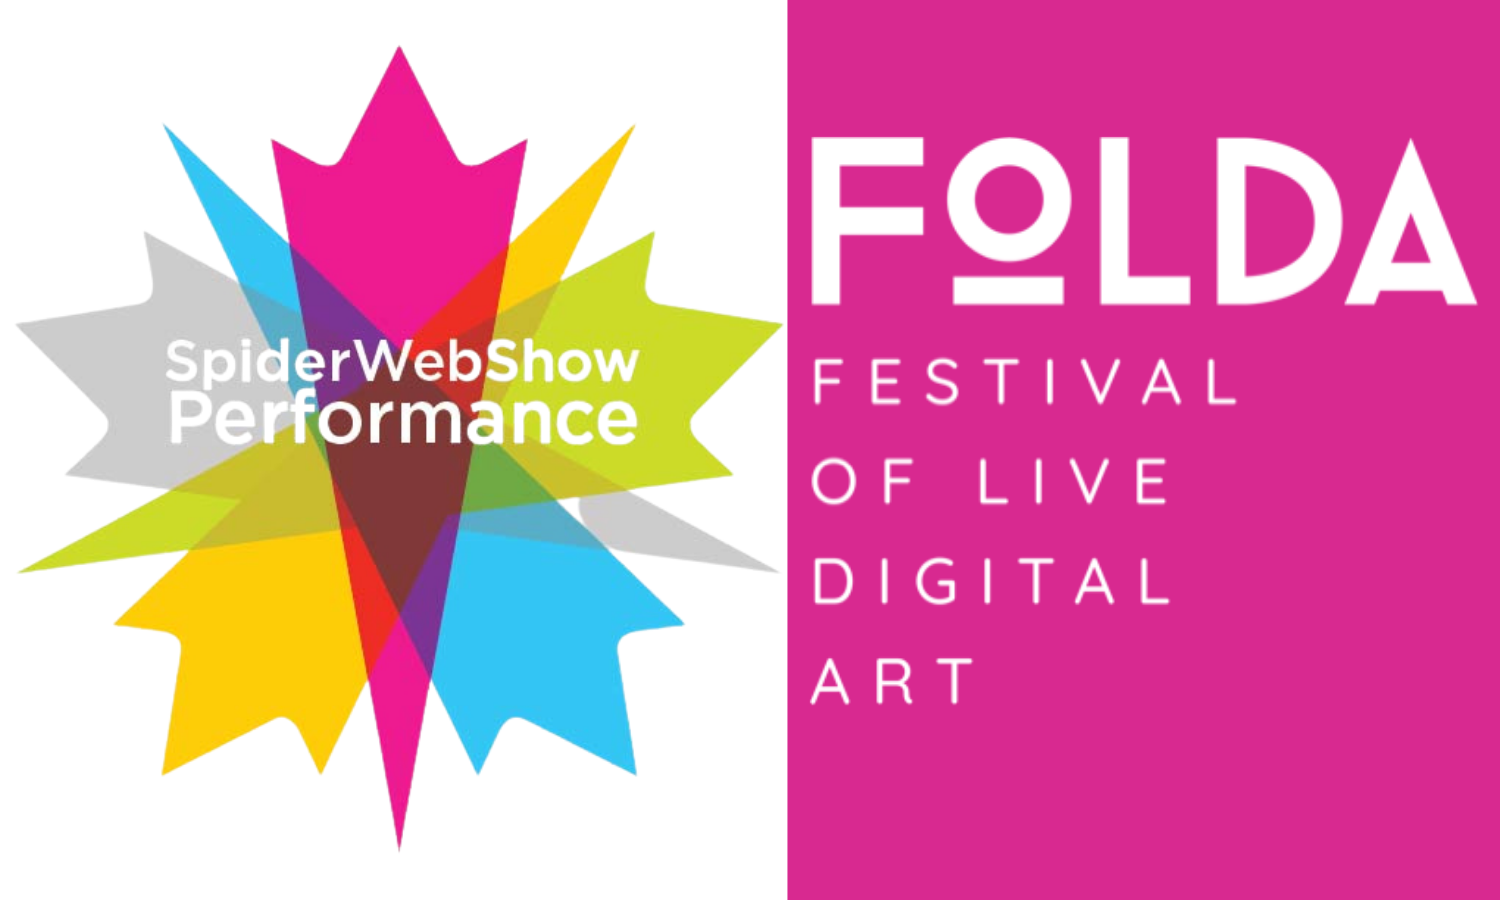 Logo for SpiderWebShow Performance and the logo for the Festival of Live Digital Art.